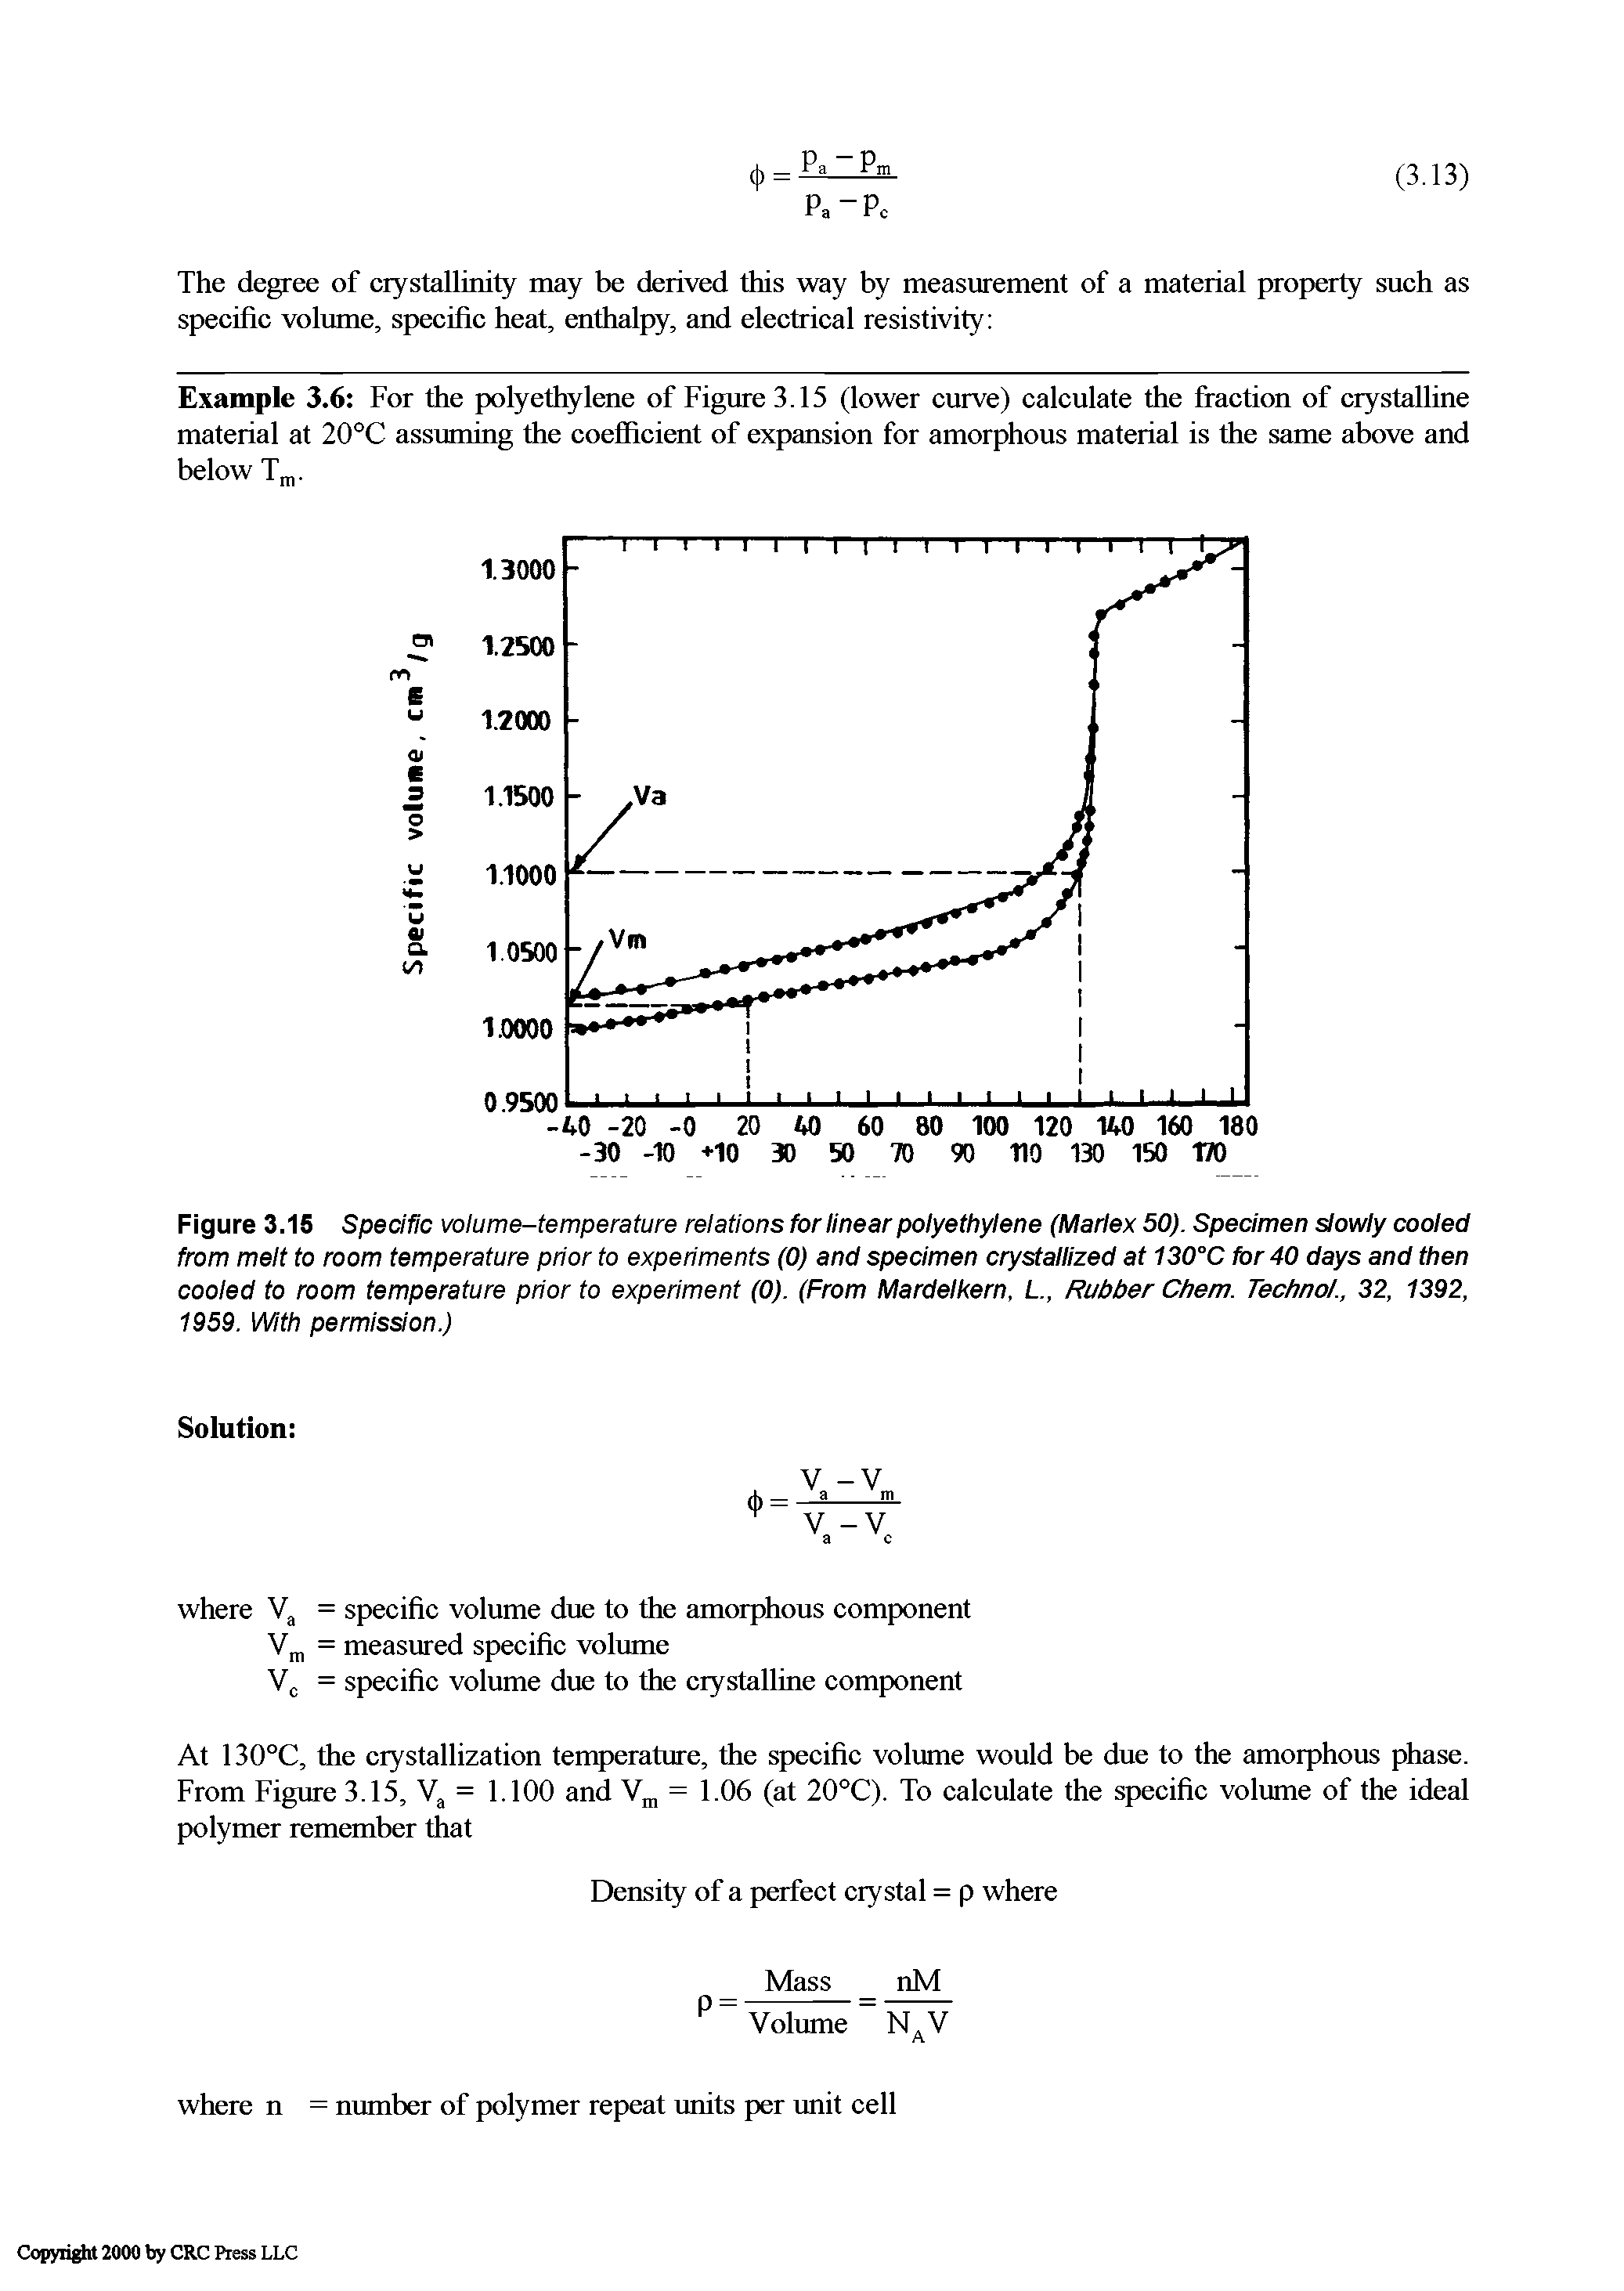 Figure 3.15 Specific voiume-temperature reiations for linear polyethylene (Marlex 50). Specimen slowly cooled from melt to room temperature prior to experiments (0) and specimen crystallized at 130°C for 40 days and then cooled to room temperature prior to experiment (0). (From Mardelkem, L, Rubber Chem. Techno ., 32, 1392, 1959. With permission.)...